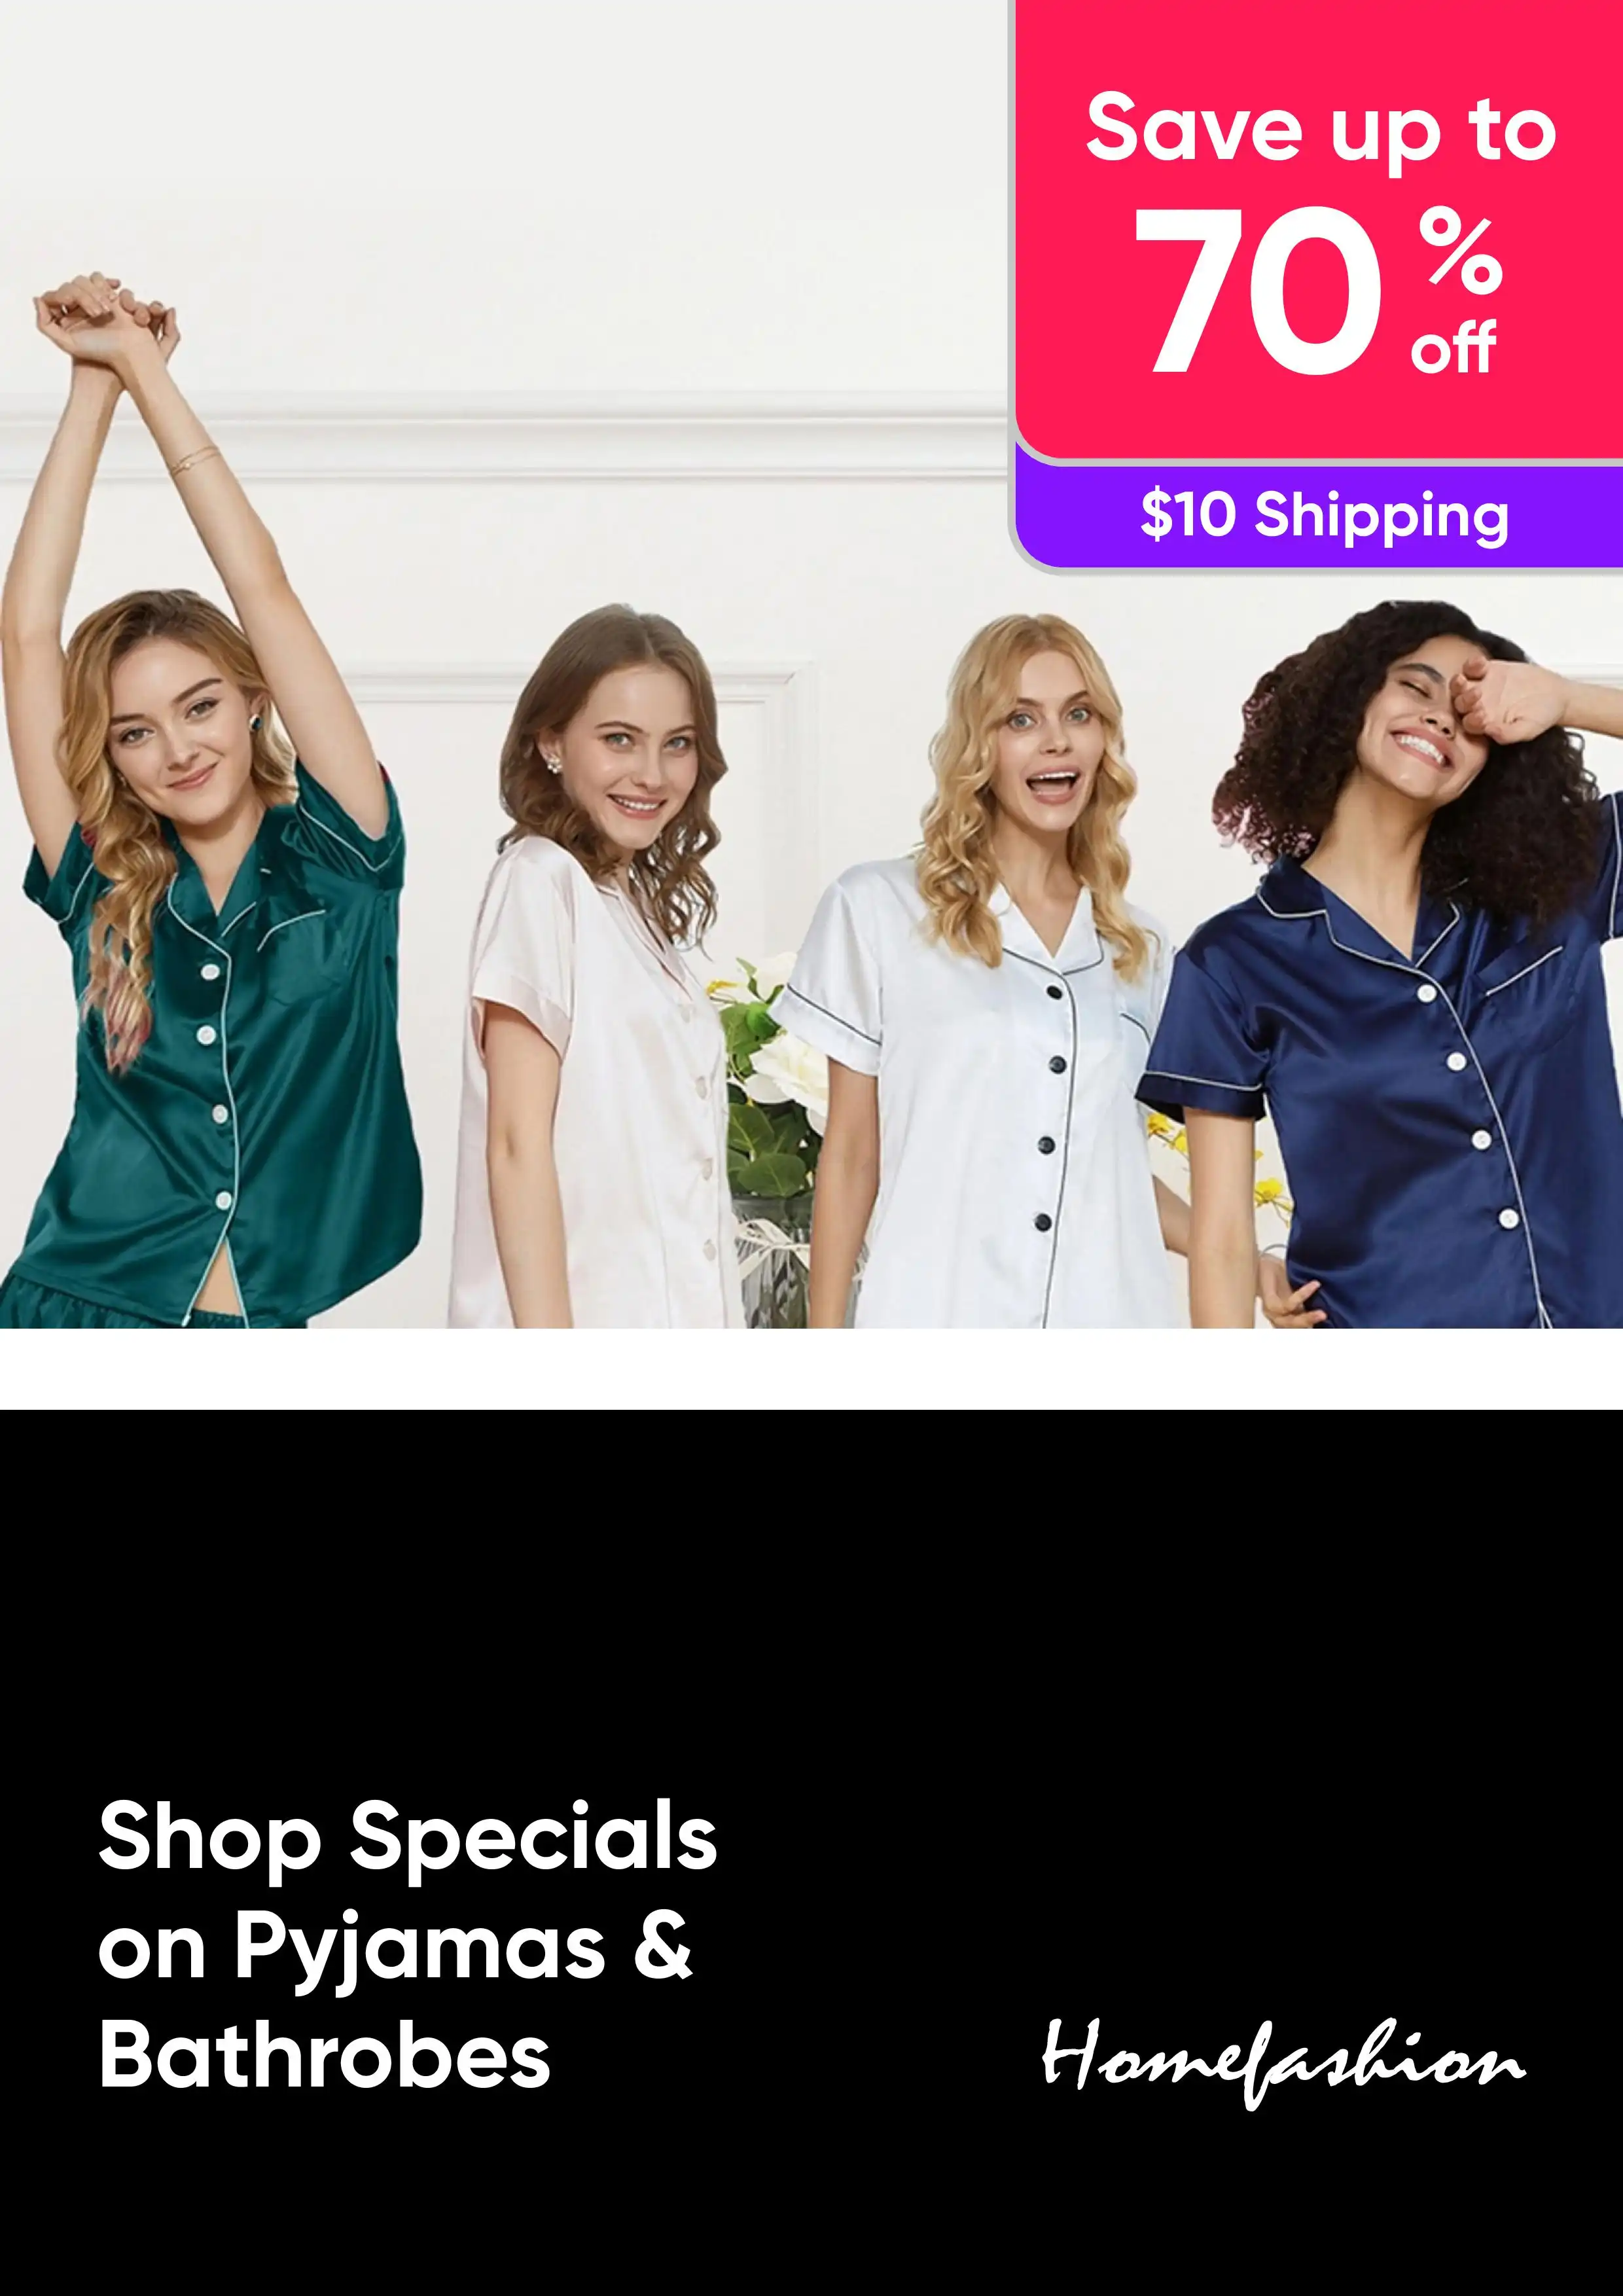 Shop Specials on Pyjamas and Bathrobes - Save Up to 70% Off